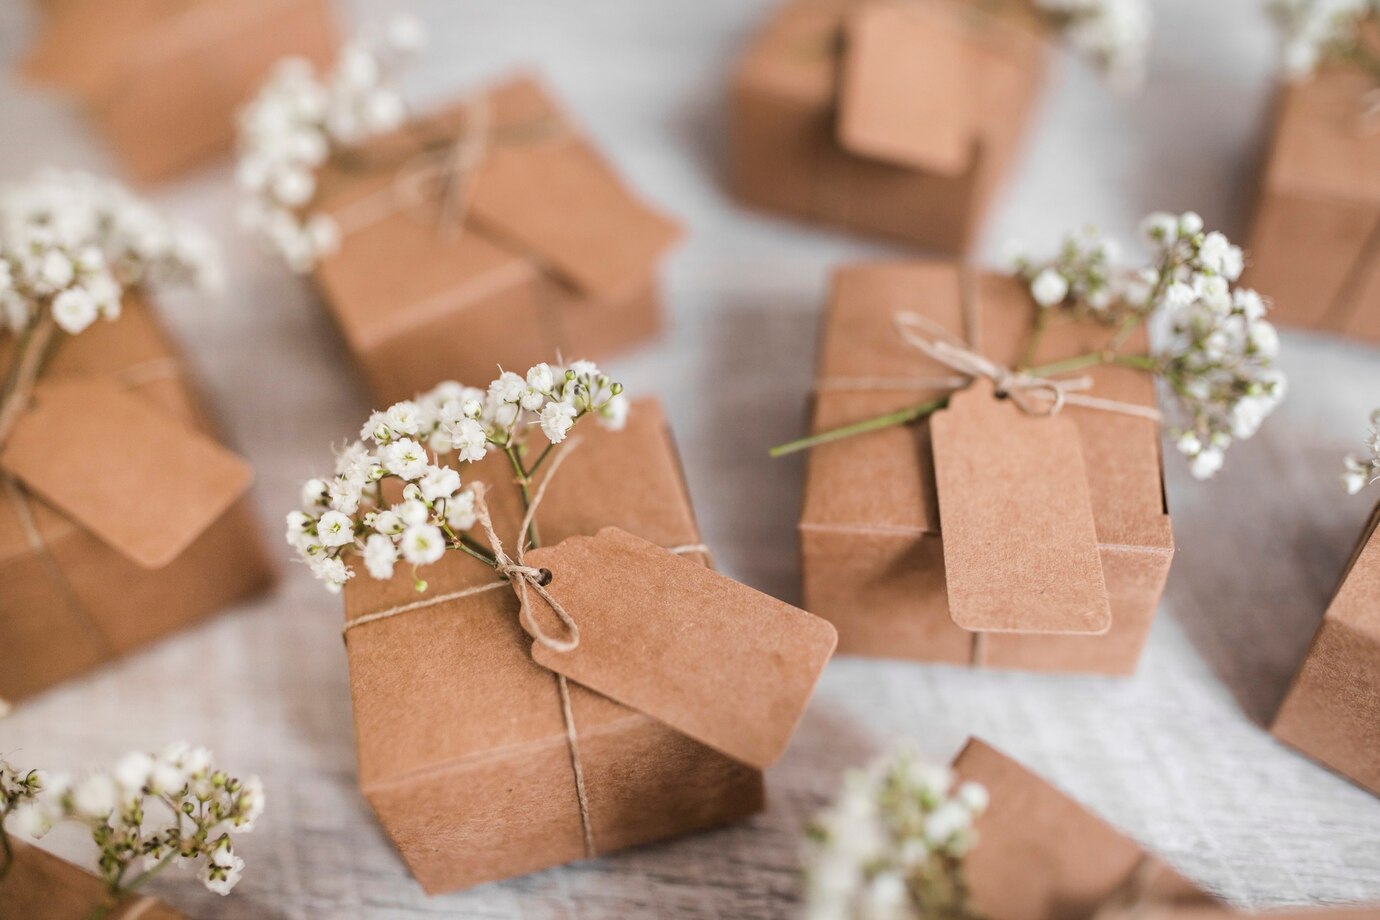 Wedding favors from Truly Wedding Favors